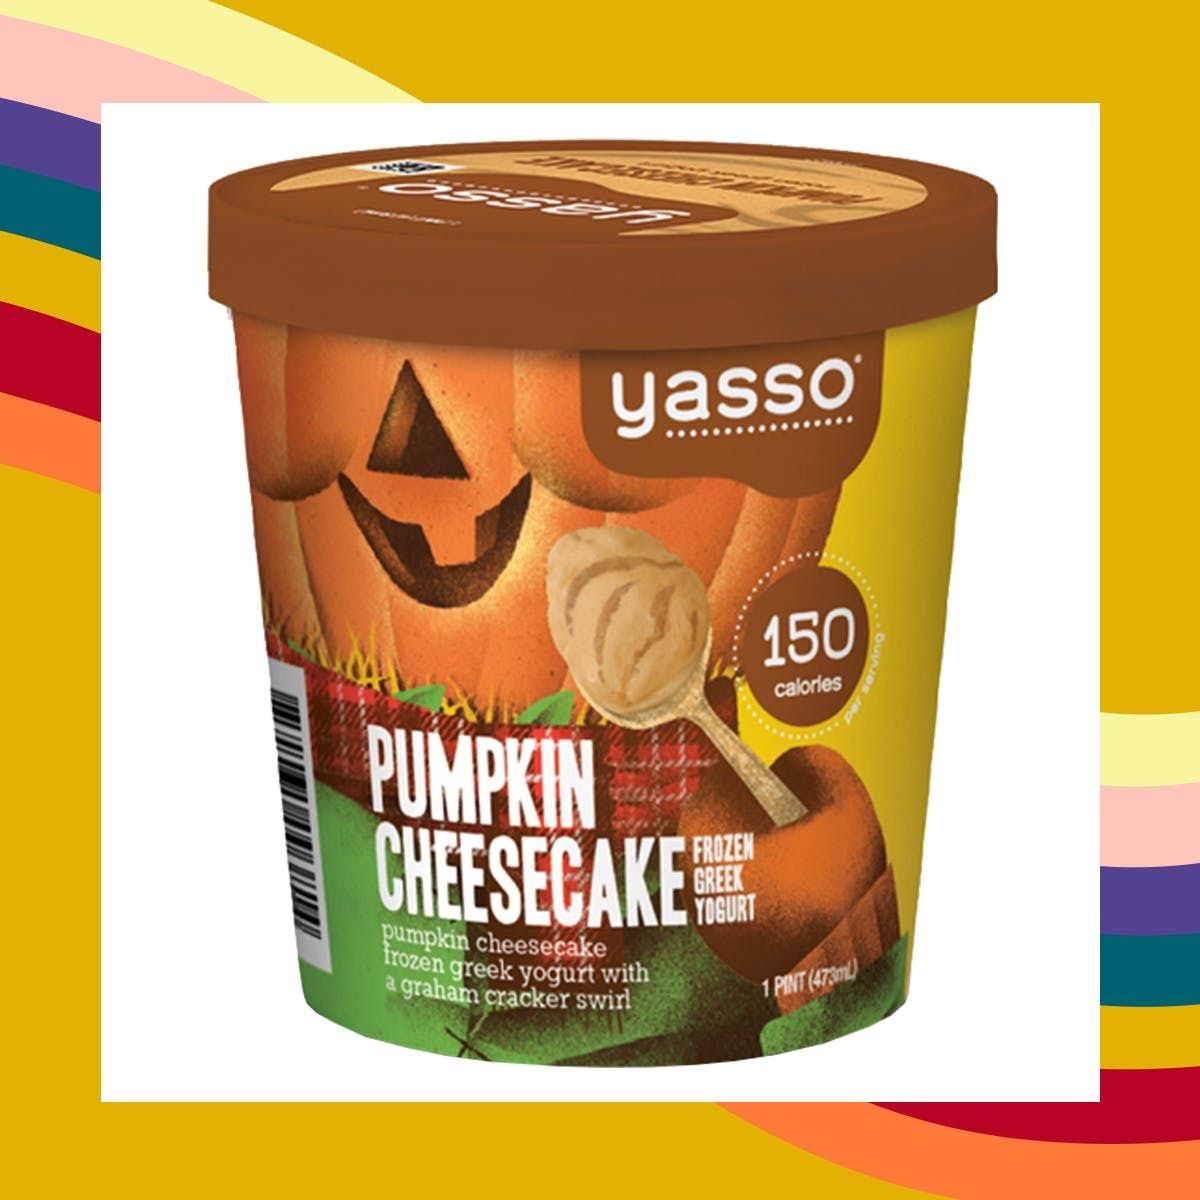 7 Healthy Ice Creams Actually Worth Buying — Even During Fall